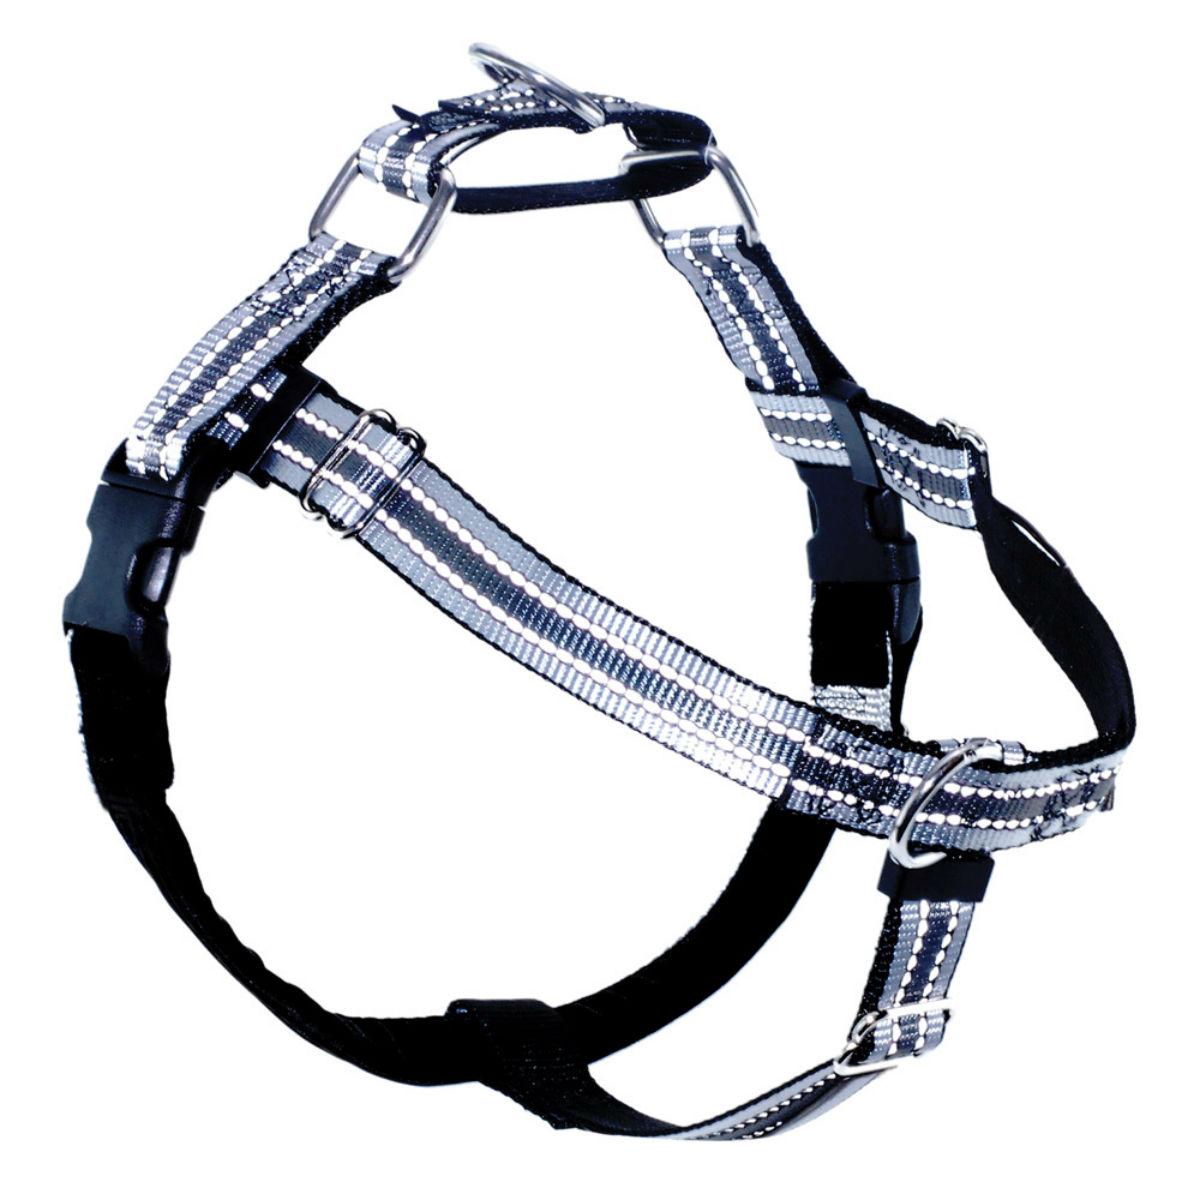 2 Hounds Design No-Pull Dog Harness Deluxe Training Package - Black Reflective